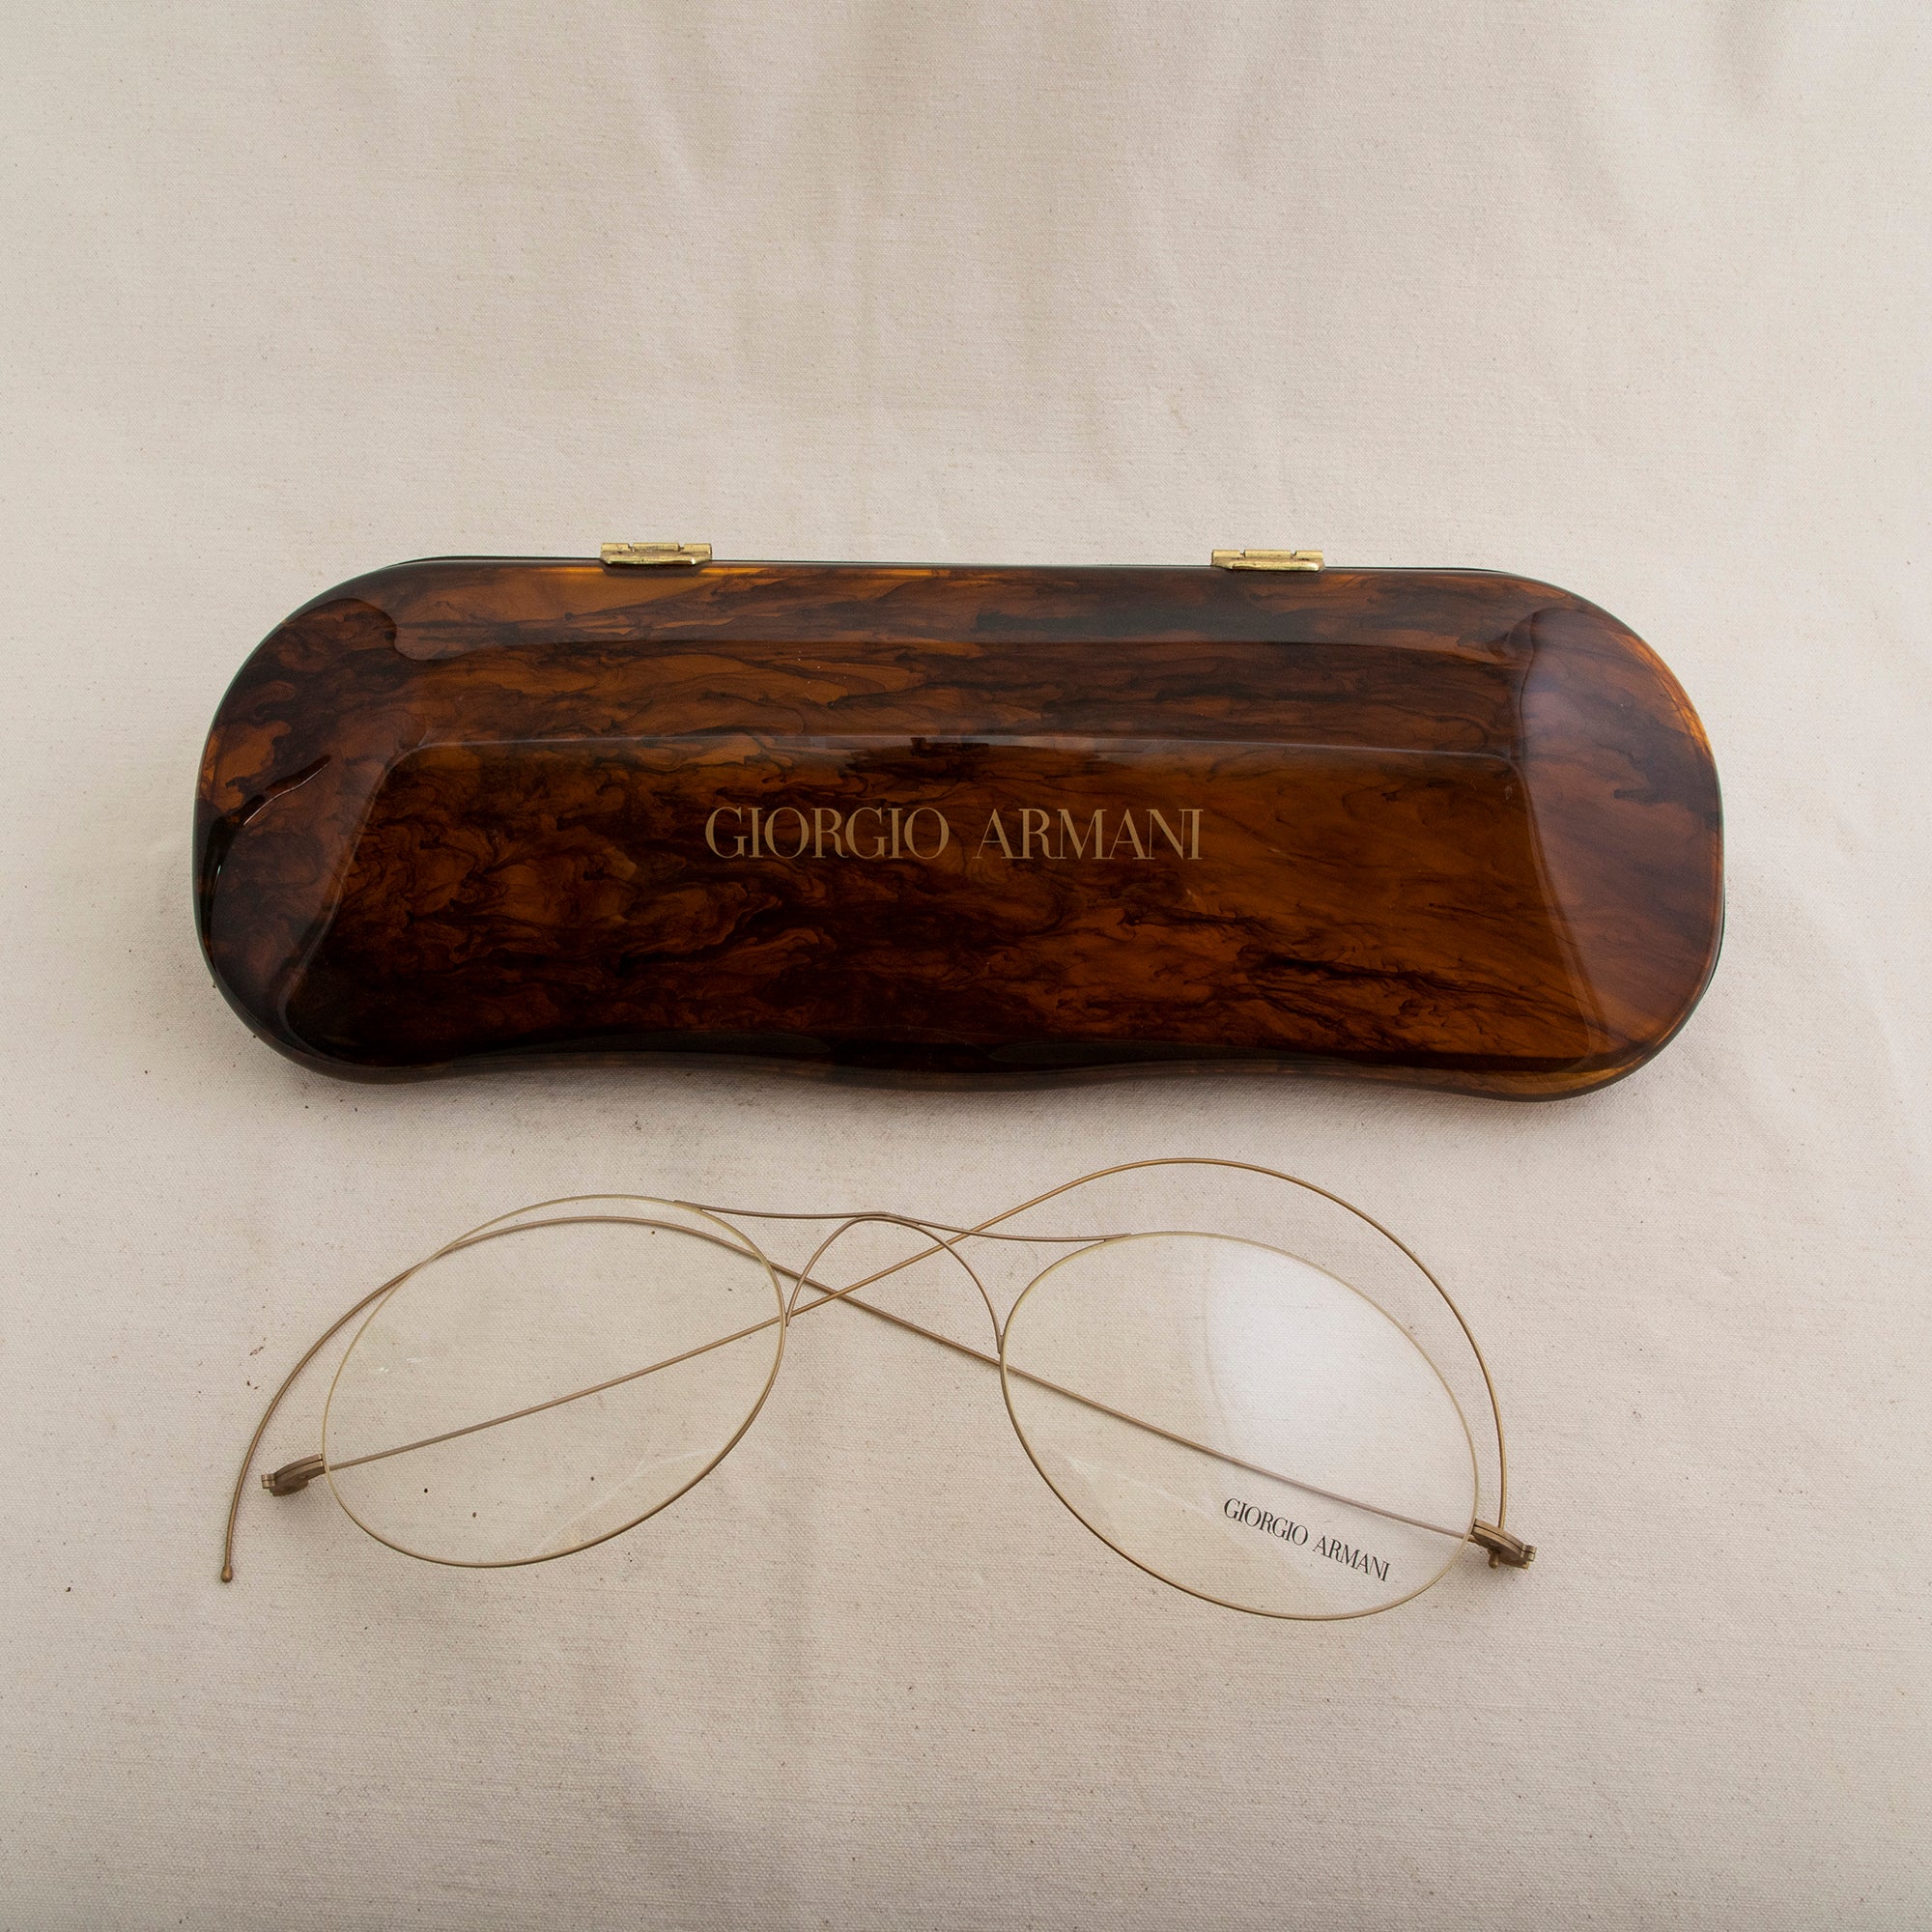 This very large mid-twentieth century French faux tortoise shell glass case factice features a pair of large wire rim glasses. Both the case and glasses are marked Georgio Armani. The case measures 18.5 inches long by 6 inches wide and 4 inches